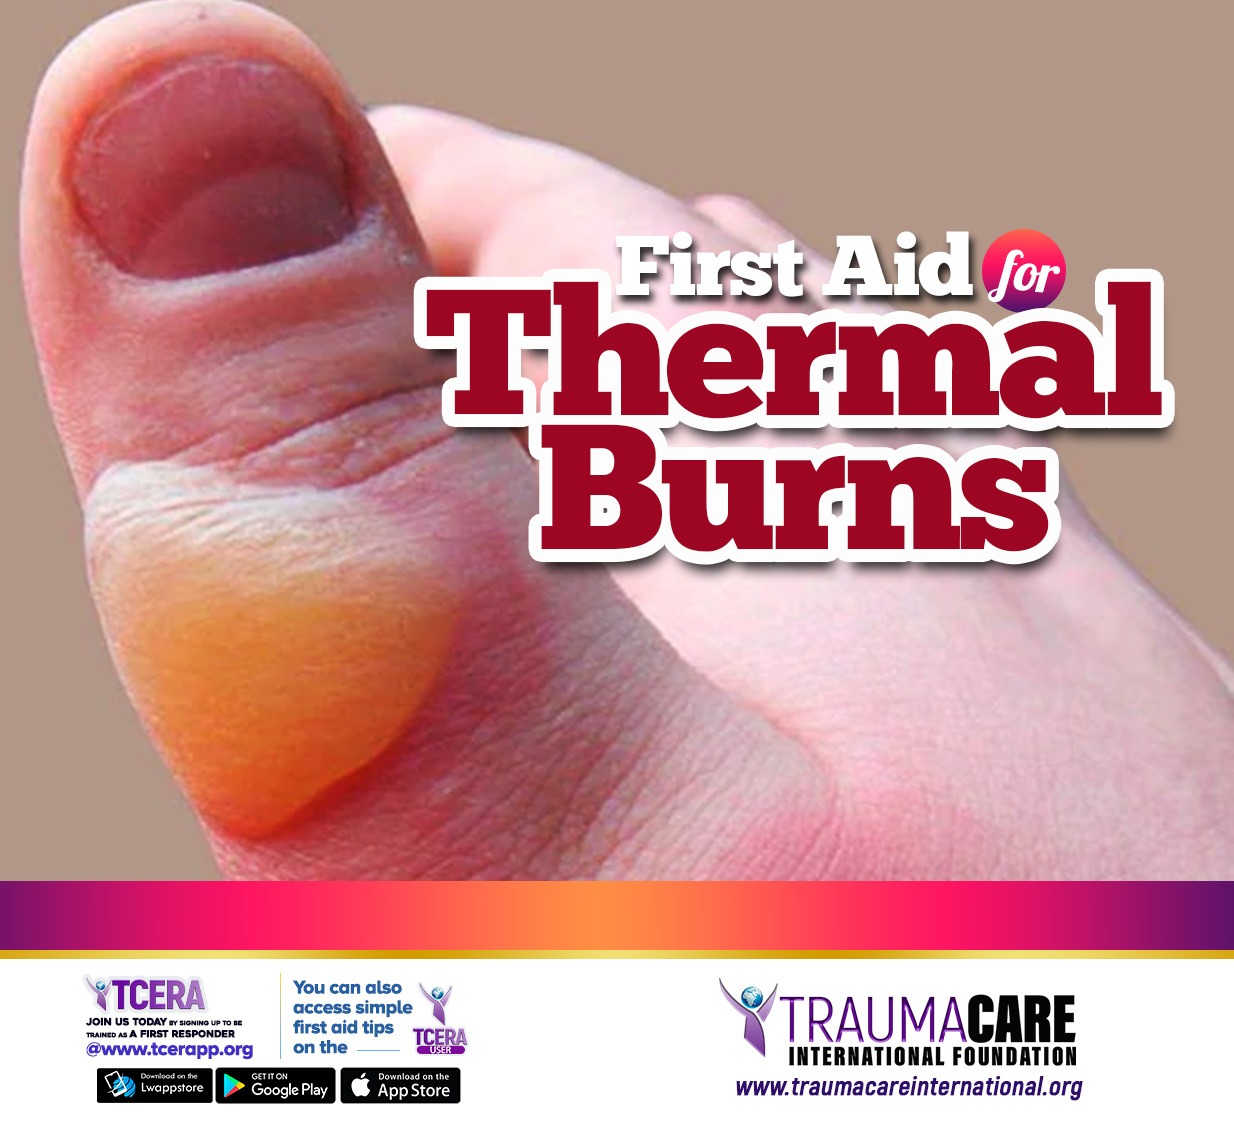 FIRST AID FOR THERMAL BURNS